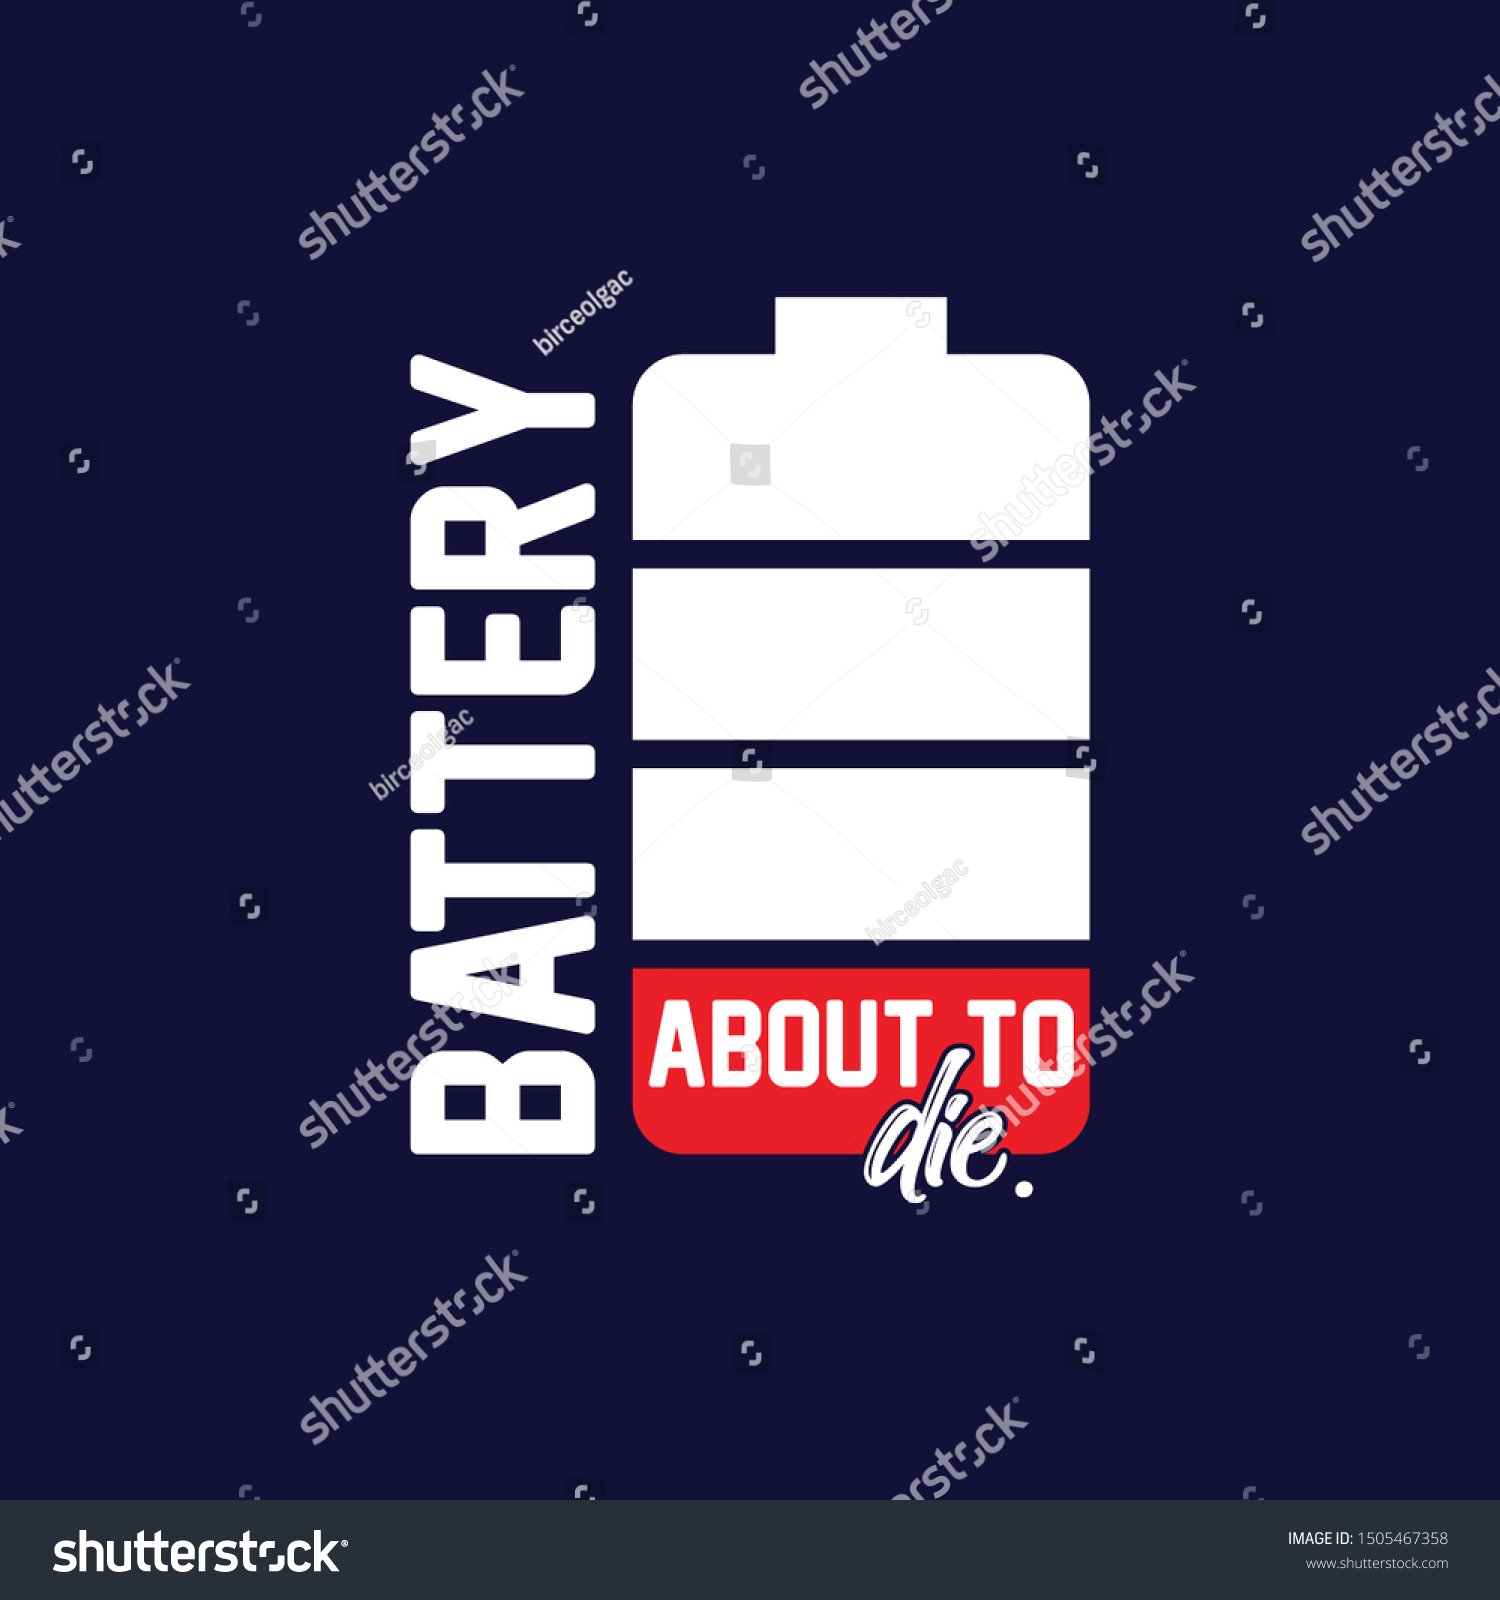 Inspirational Quote Battery About Die Hand Stock Vector (Royalty Free) 1505467358